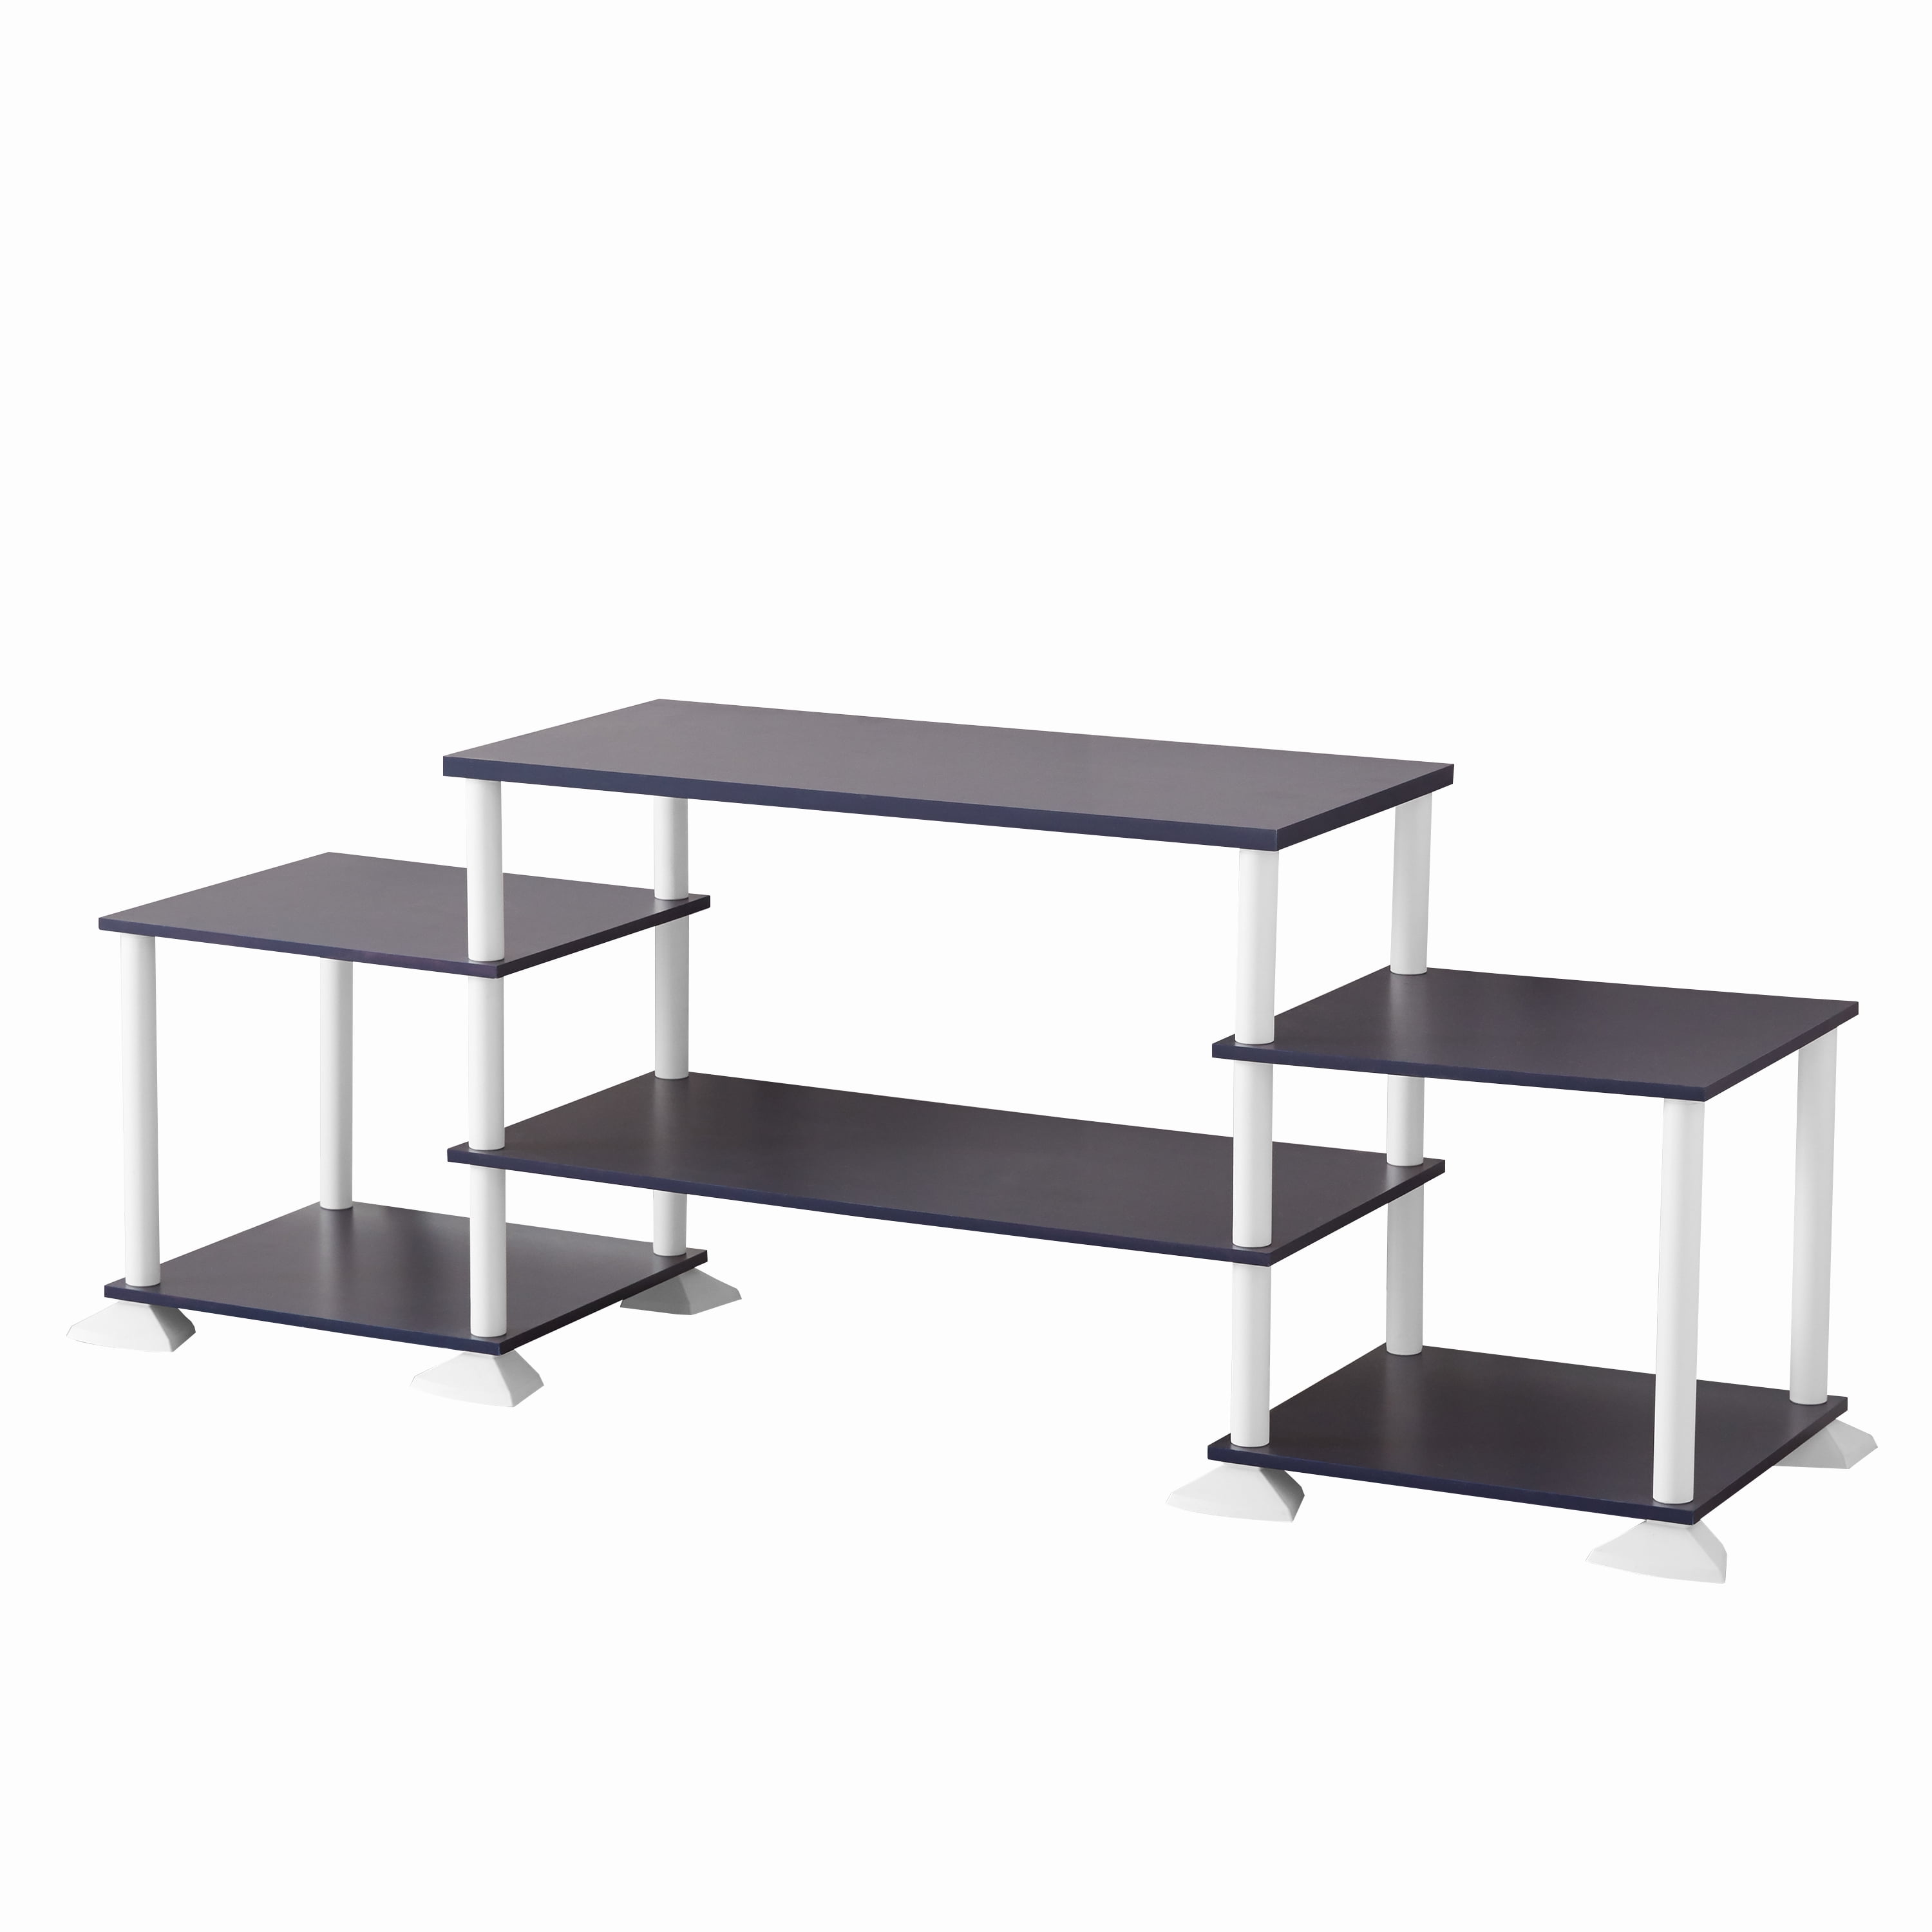 Multiple Sizes and Colors Details about   Mainstays No-Tools Assembly Entertainment Center 